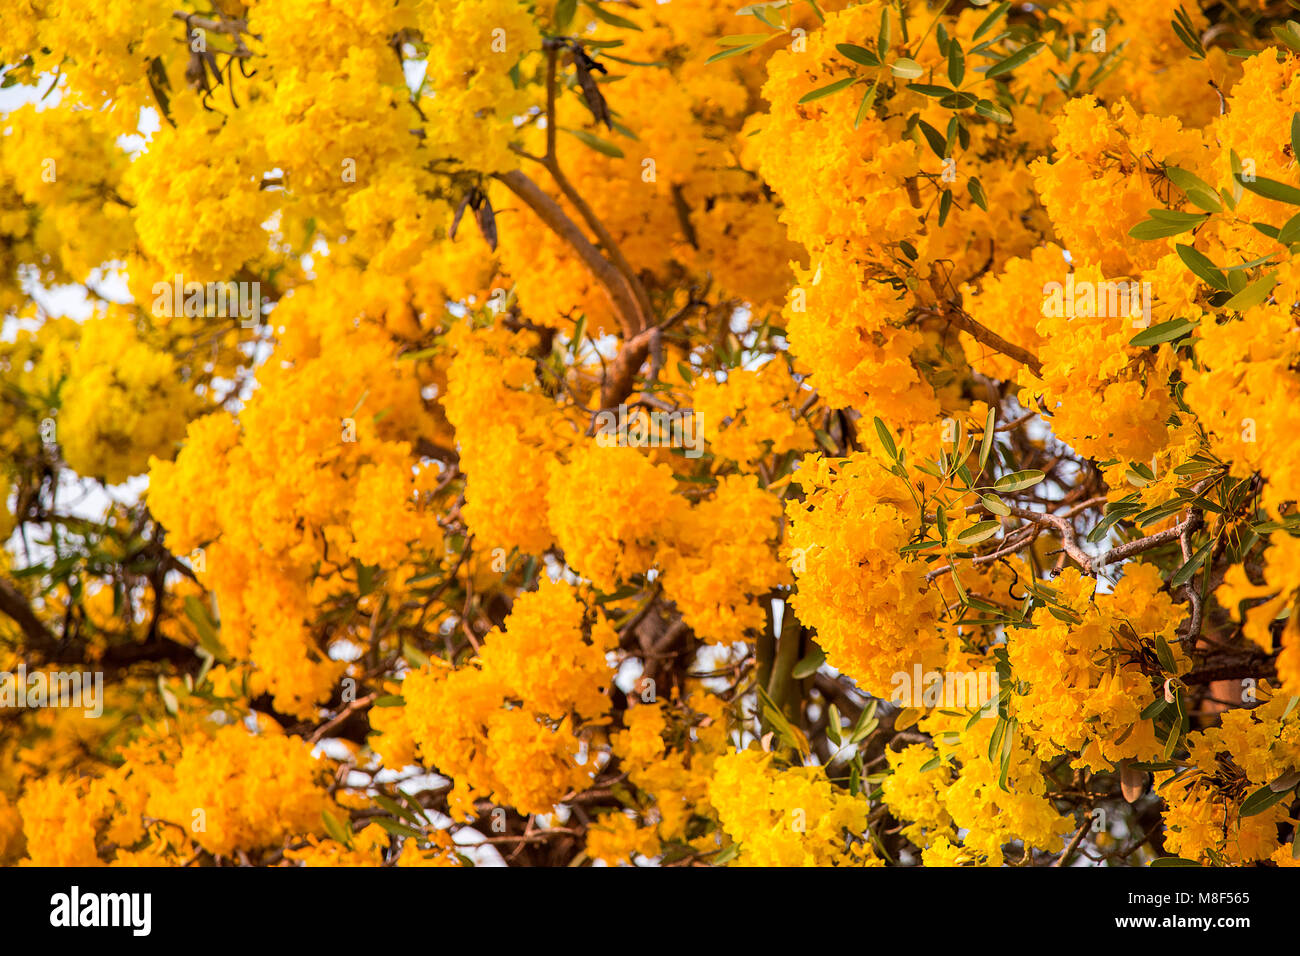 Silver trumpet tree, Tree of gold, Paraguayan silver trumpet tree. Blooming yellow flower on summer season in Thailand Stock Photo